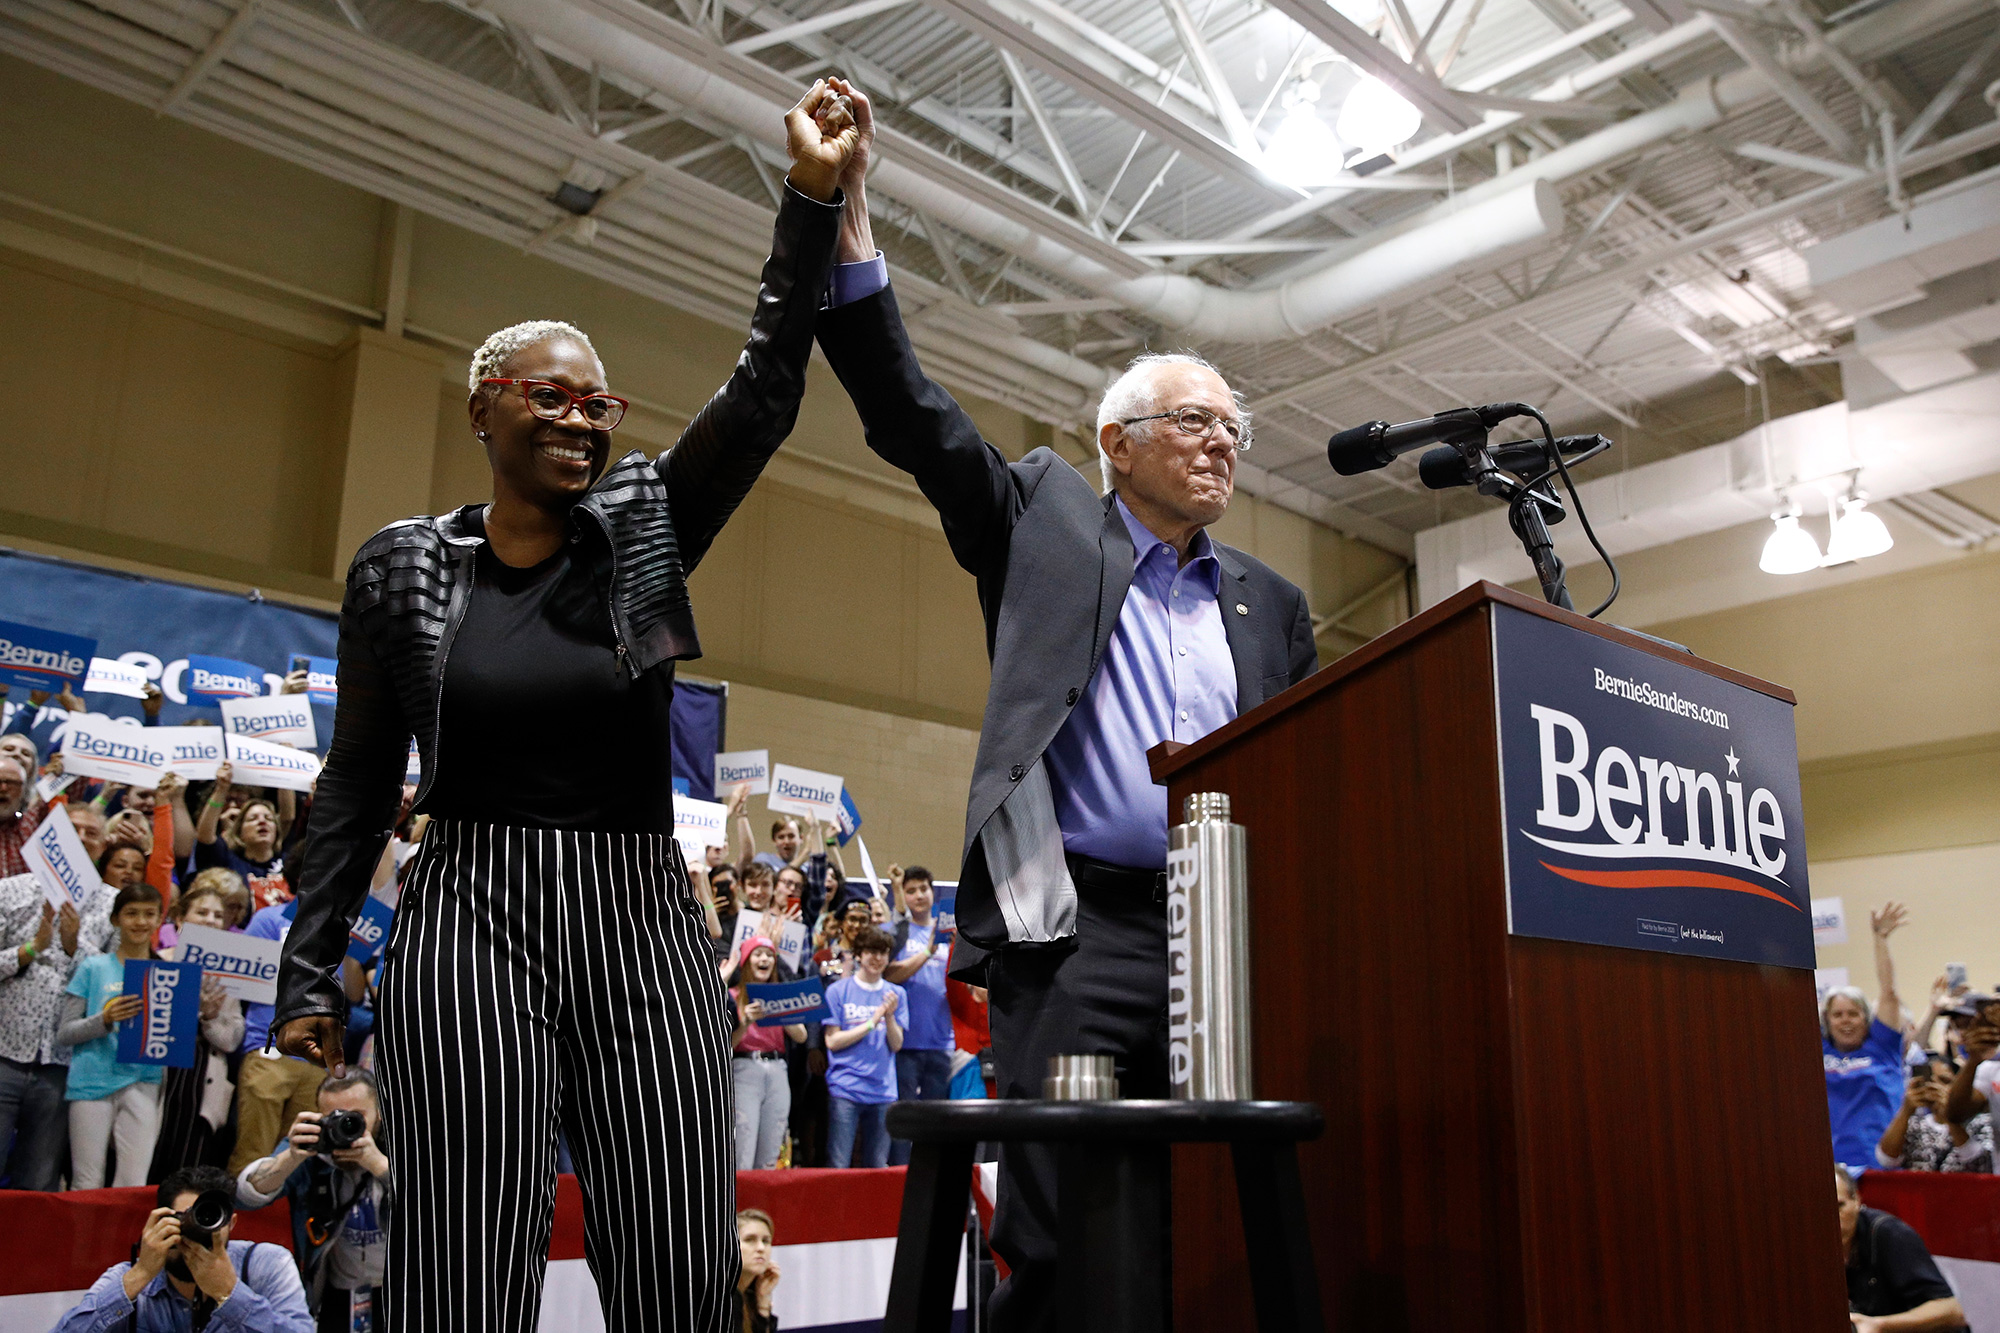 Democratic presidential candidate Sen. Bernie Sanders, right, stands onstage with former Ohio state Sen. Nina Turner before speaking at a campaign event in North Charleston, SC, Feb. 26, 2020. (Patrick Semansky—AP)